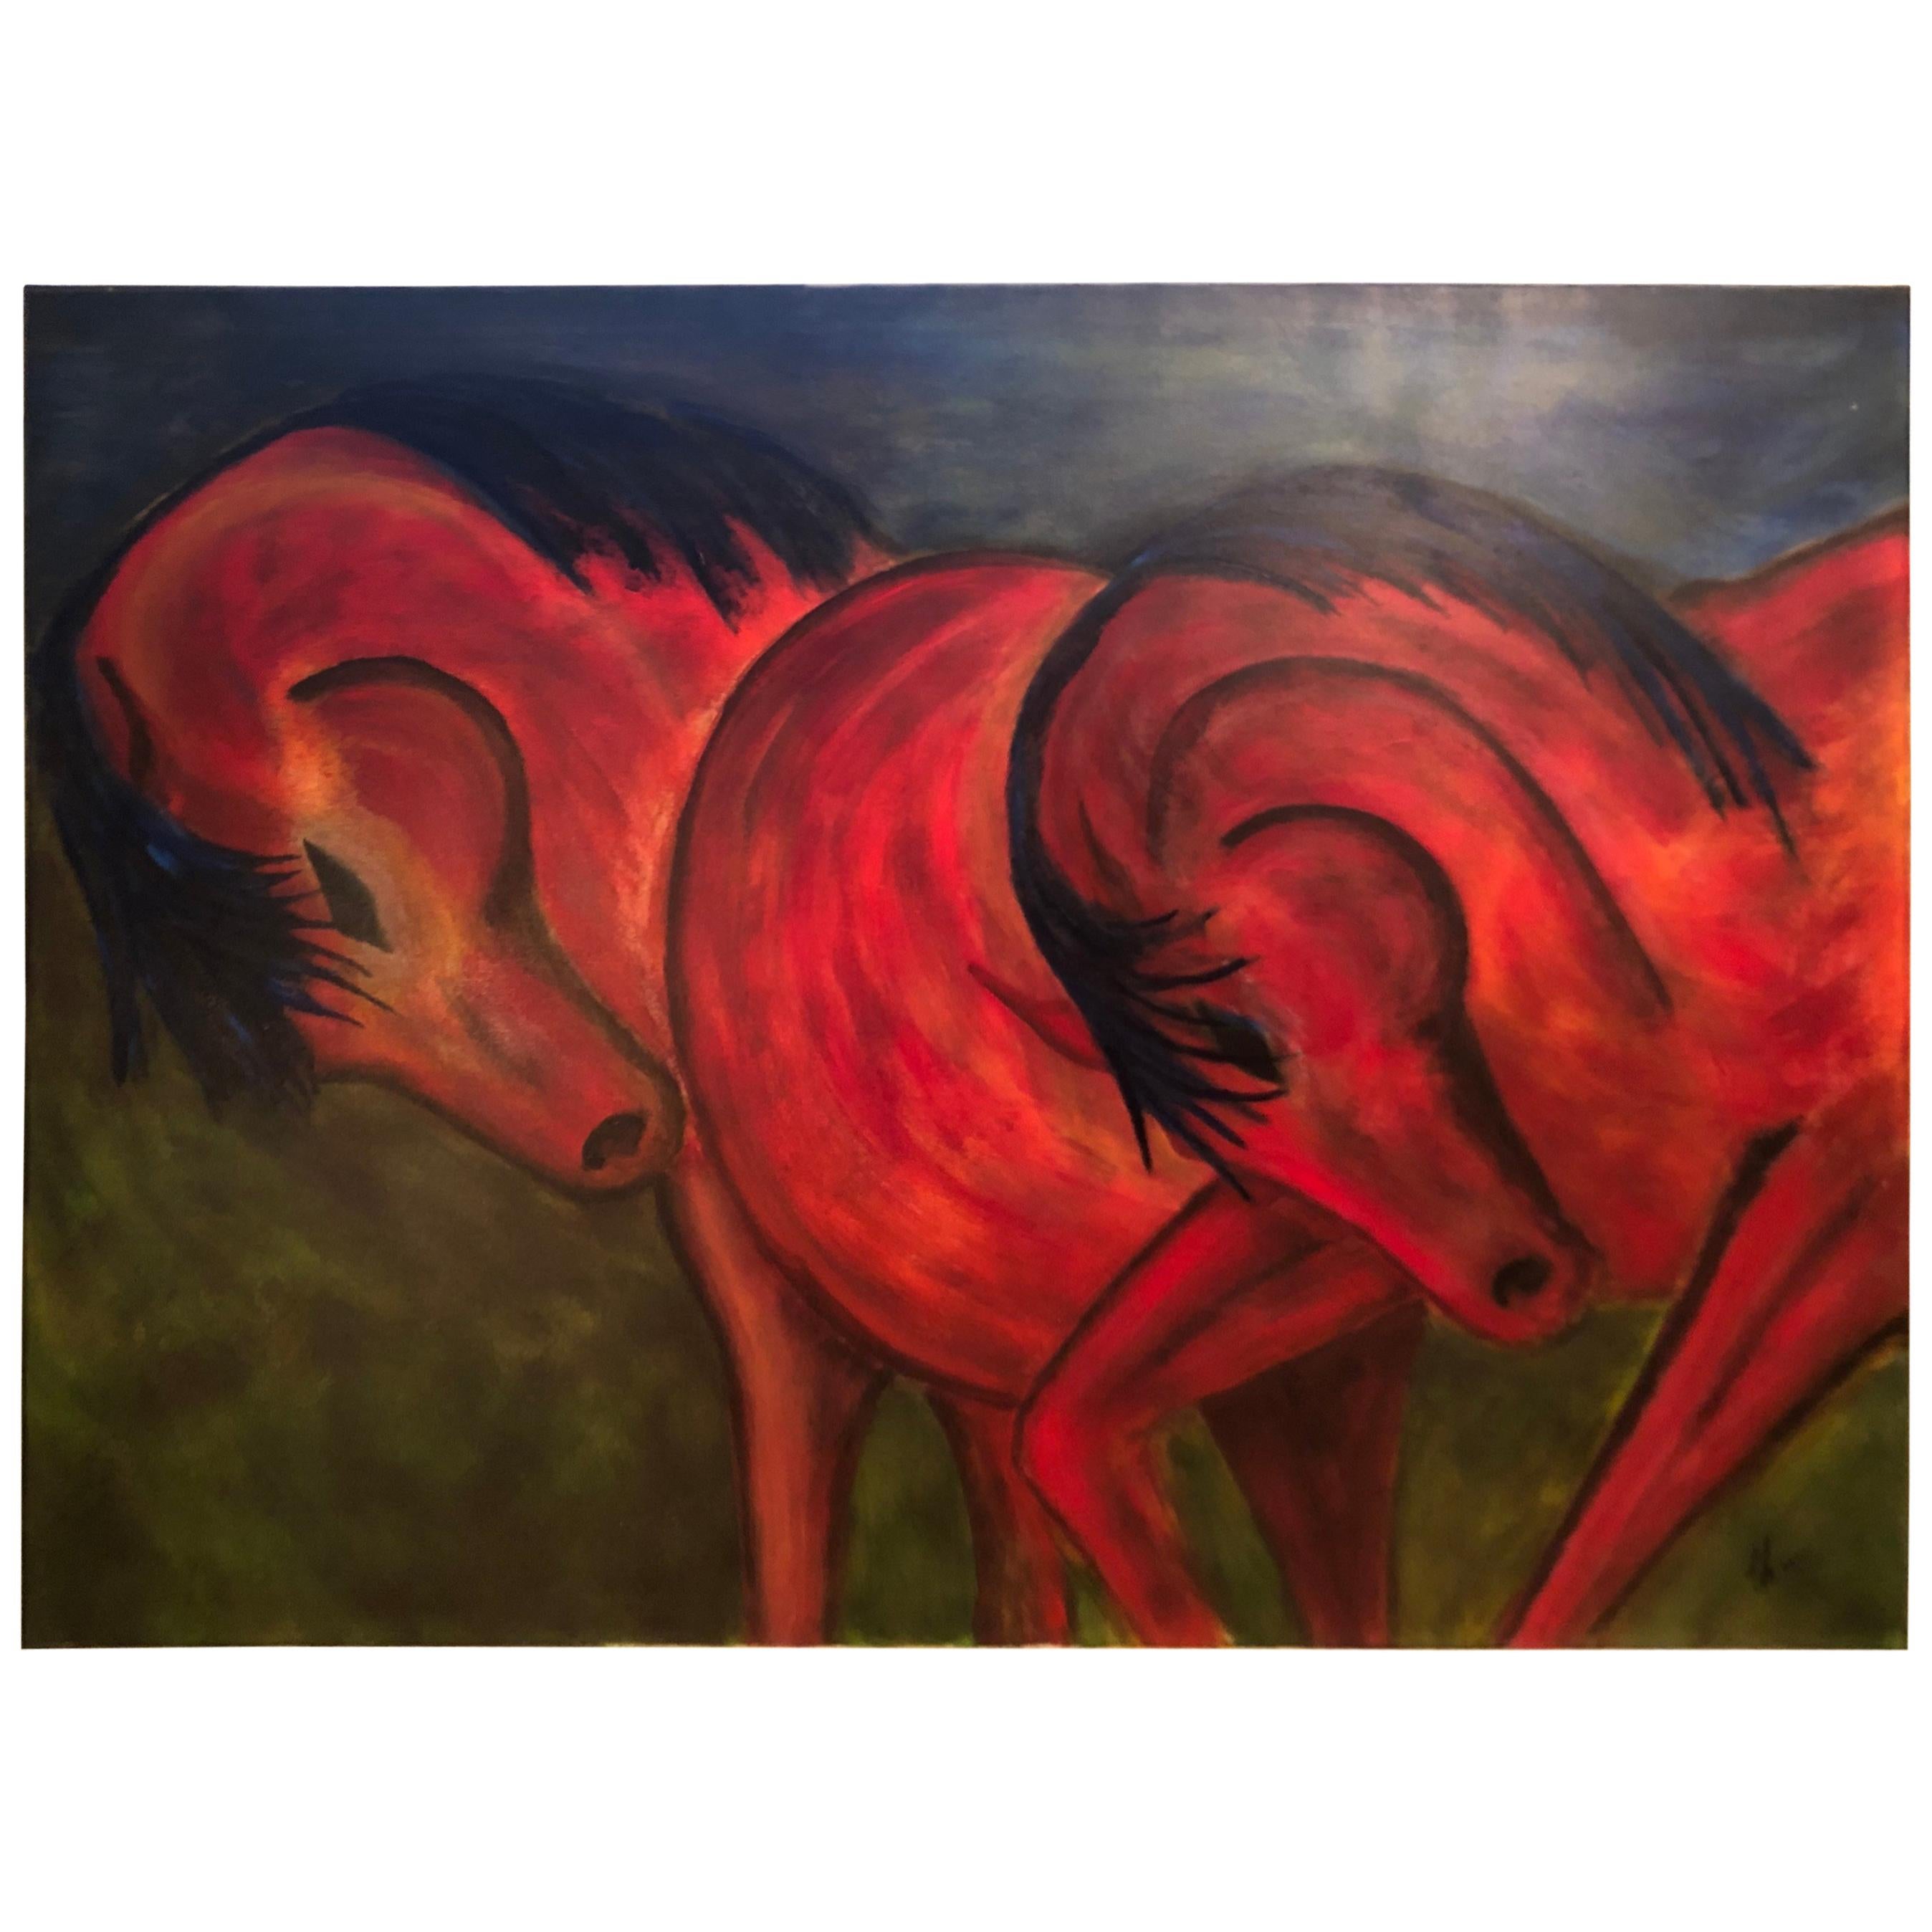 Enormous contemporary oil on canvas of horses. This item has recently been reframed ,see all photos. Can be hung horizontally or vertically but the artists signature is in the lower right corner. Clean modern lines.

Dimensions
Height: 38 in. (91.44